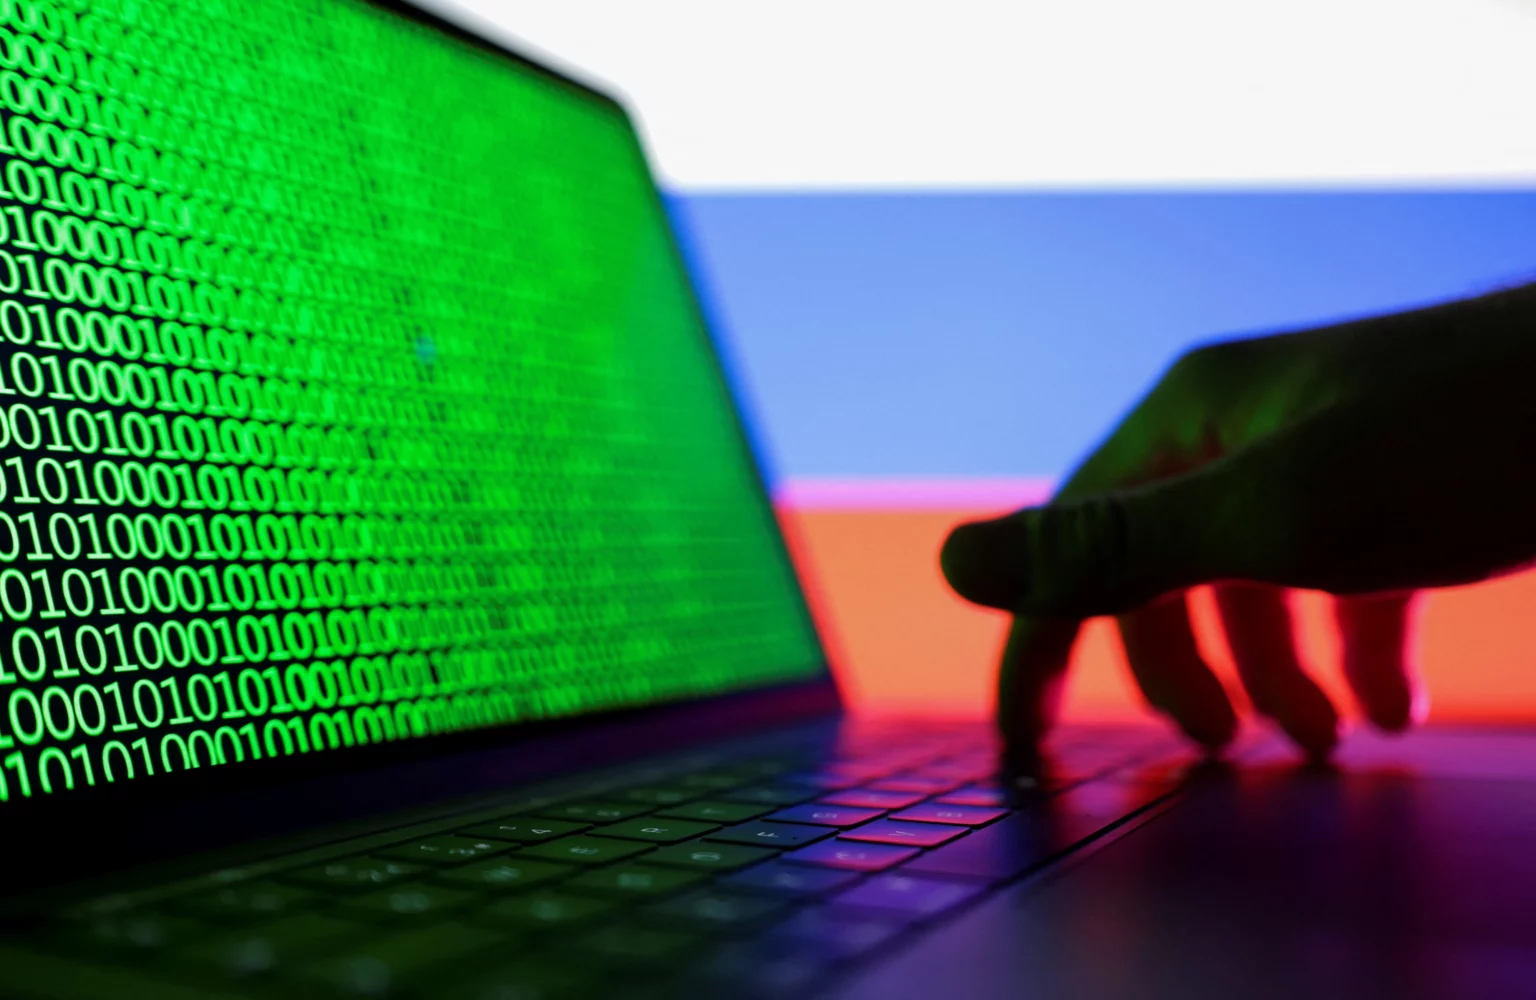 russian-cyber-spies-behind-cyberattack-on-ukraines-power-grid-in-2022-mandiant-report